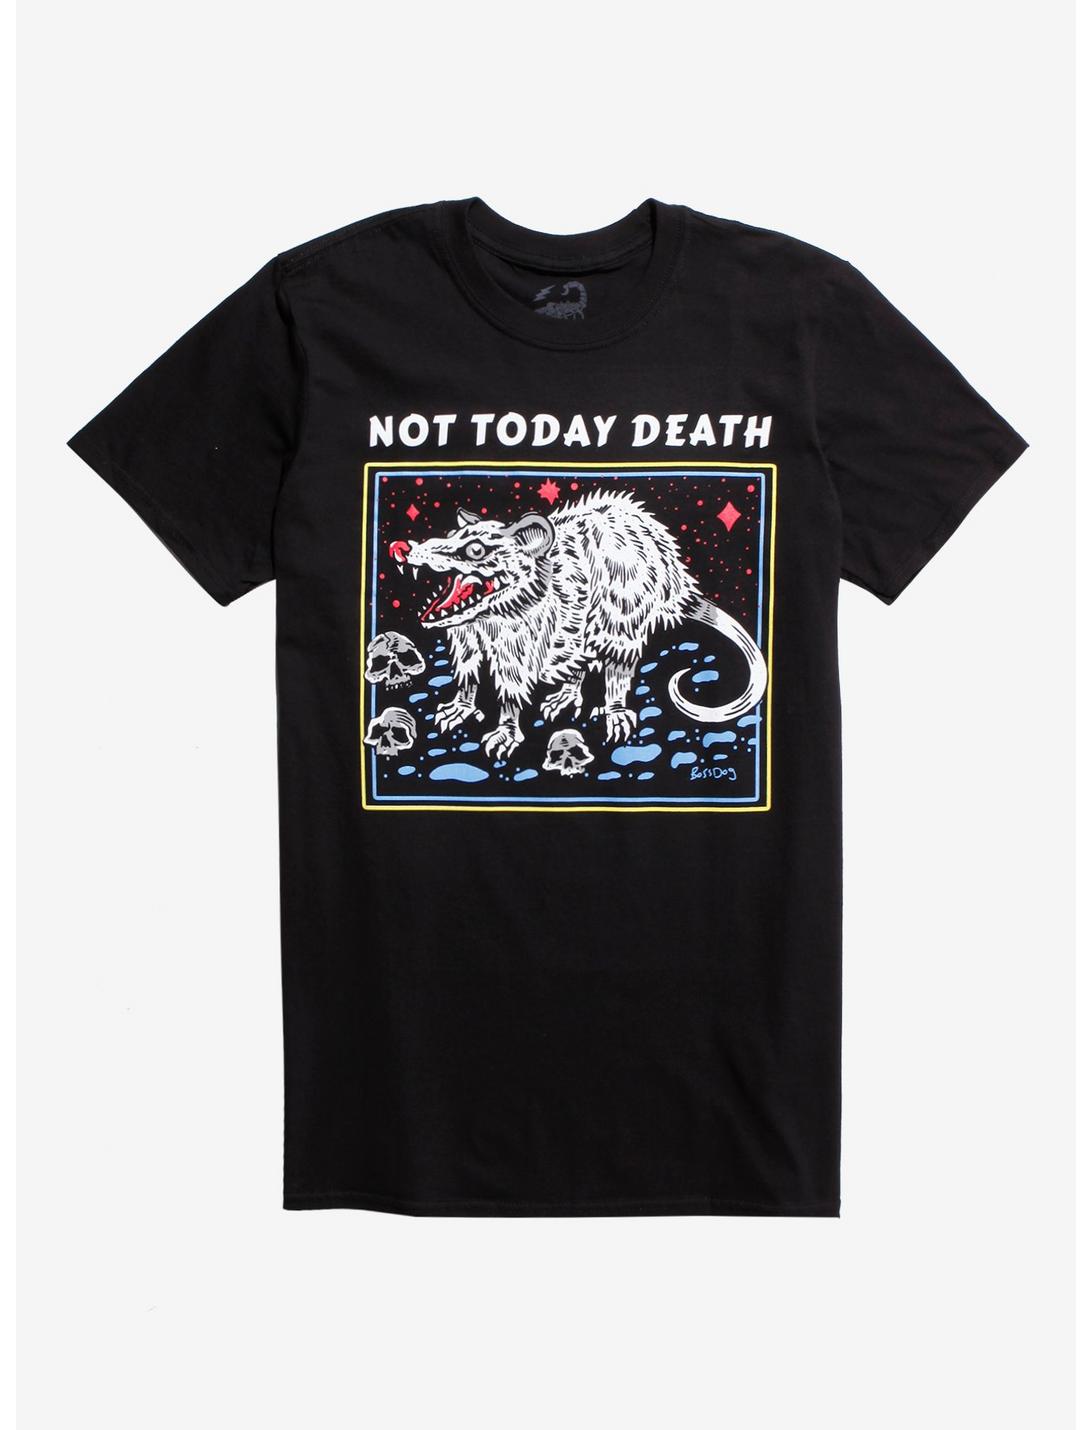 Not Today Death T-Shirt By Boss Dog Hot Topic Exclusive, BLACK, hi-res